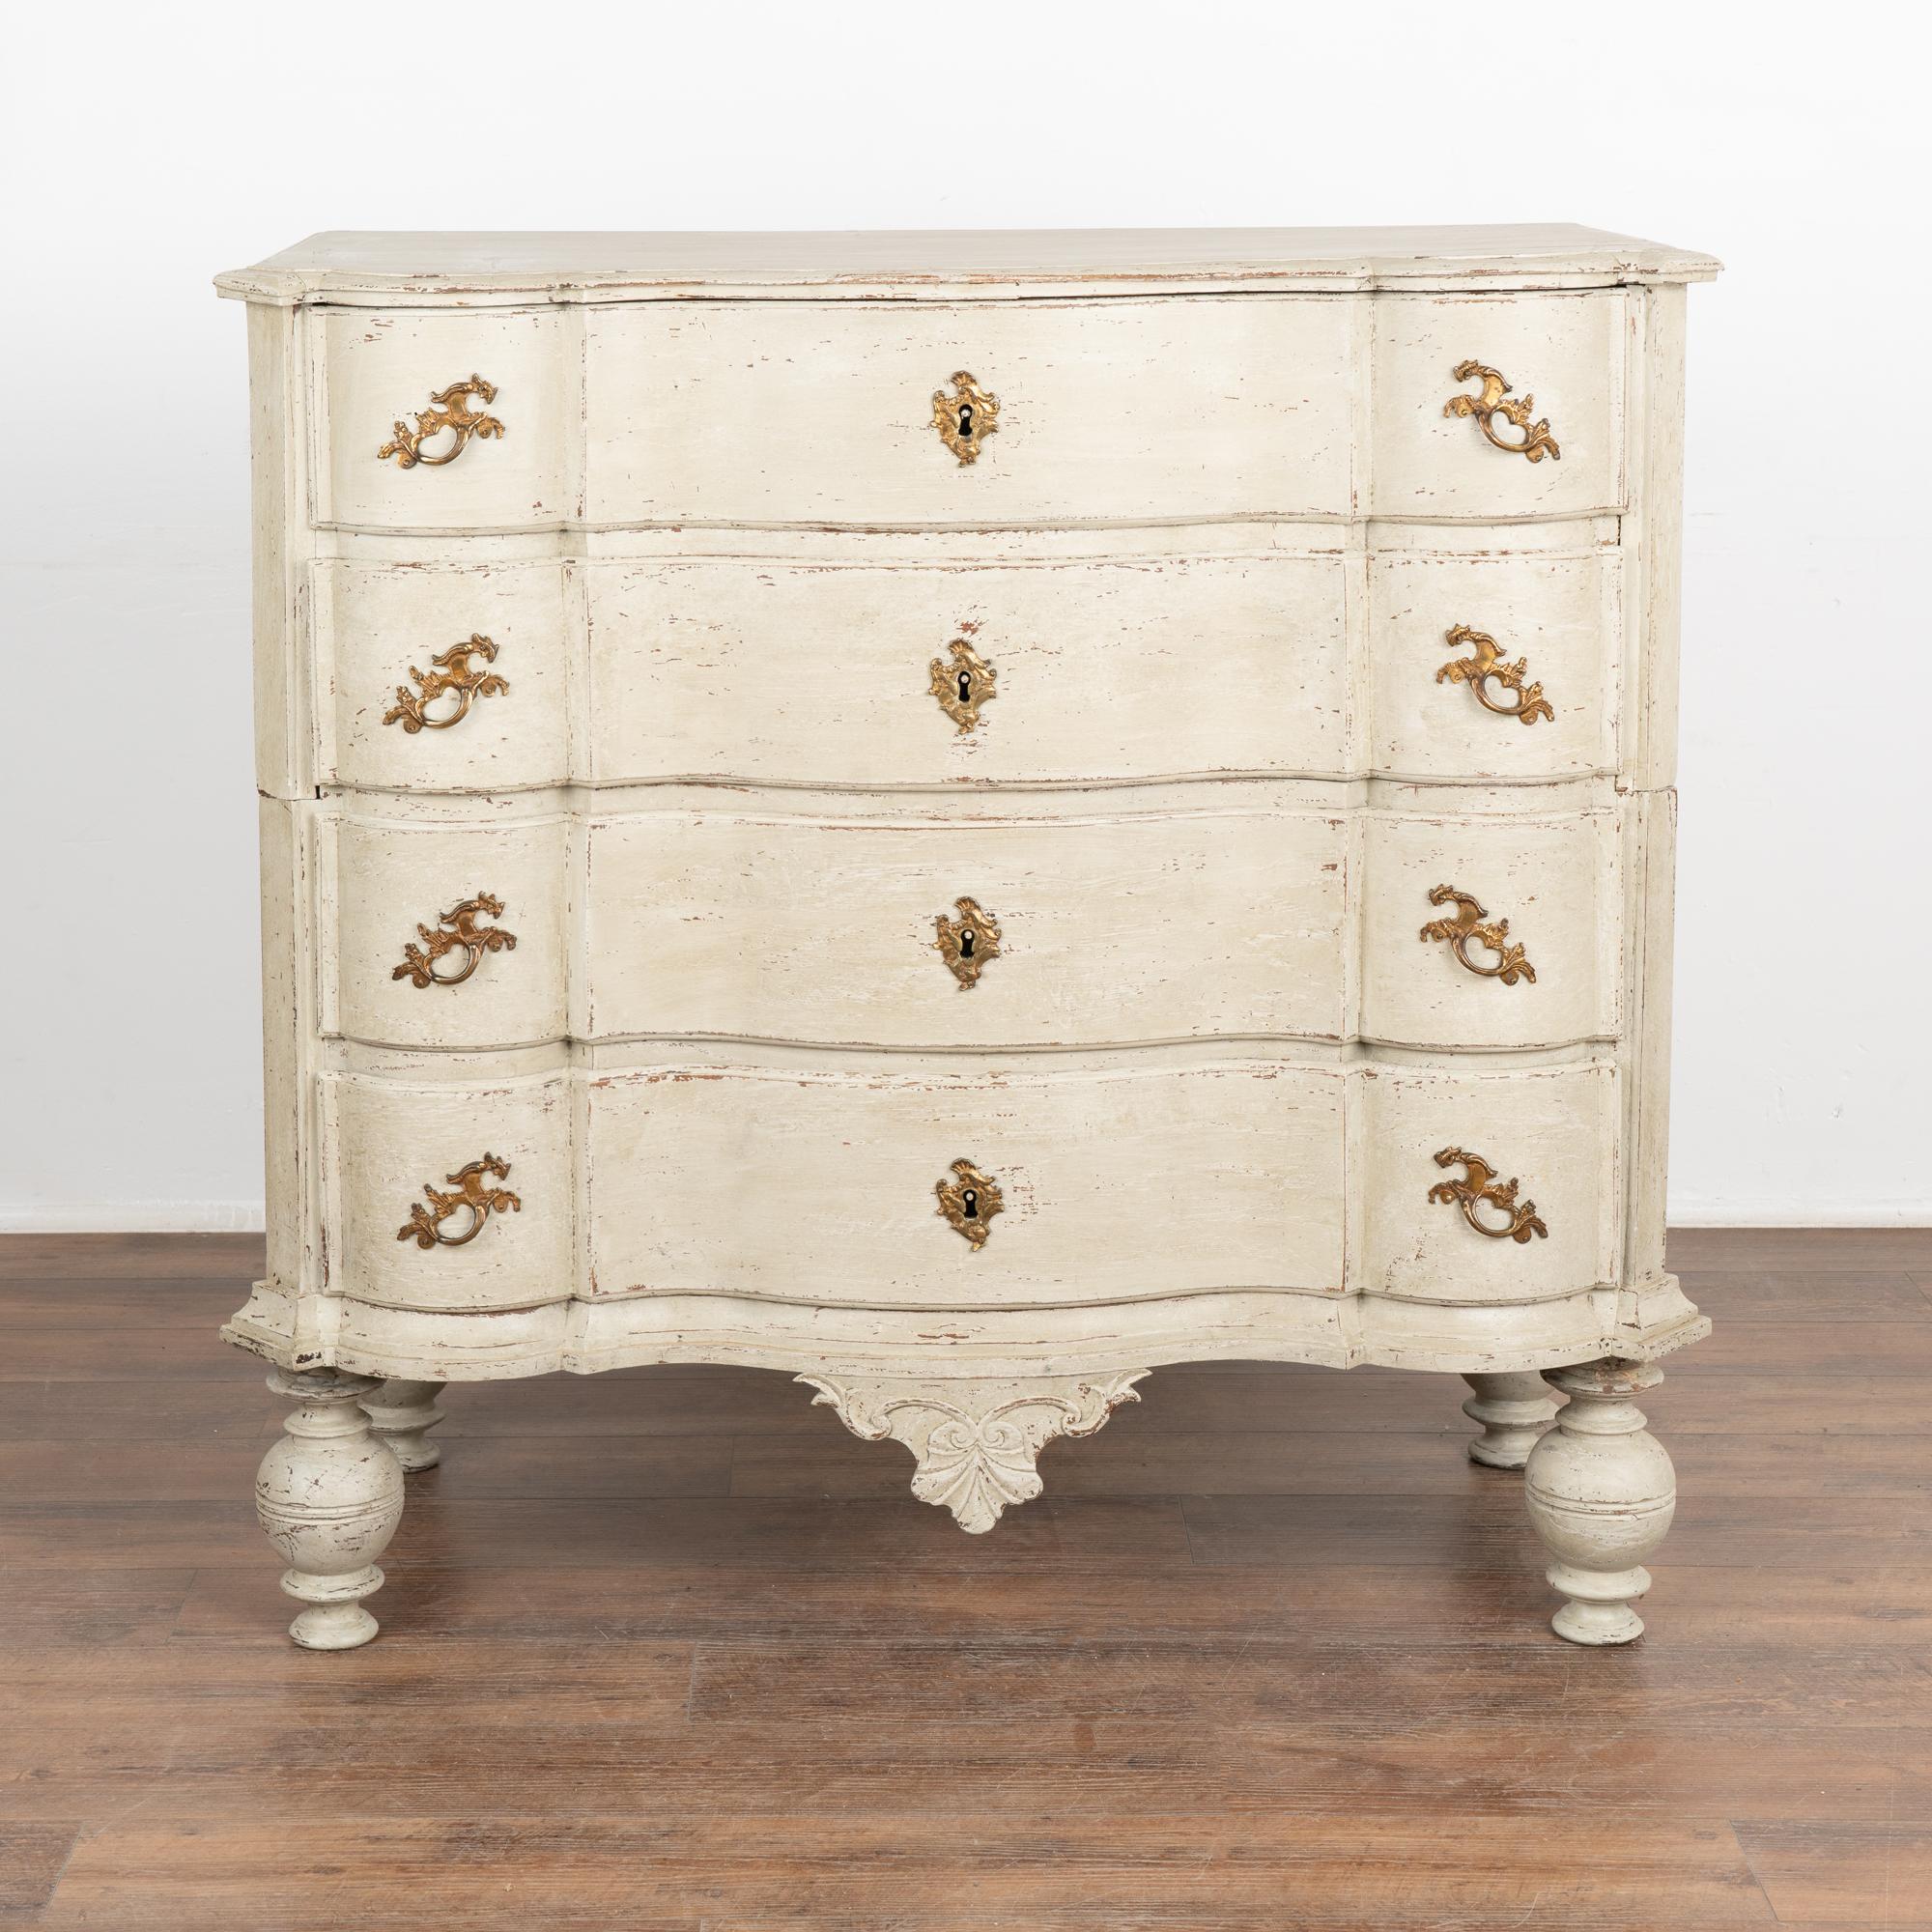 Danish Large Oak White Painted Chest of Drawers, Denmark circa 1770 For Sale